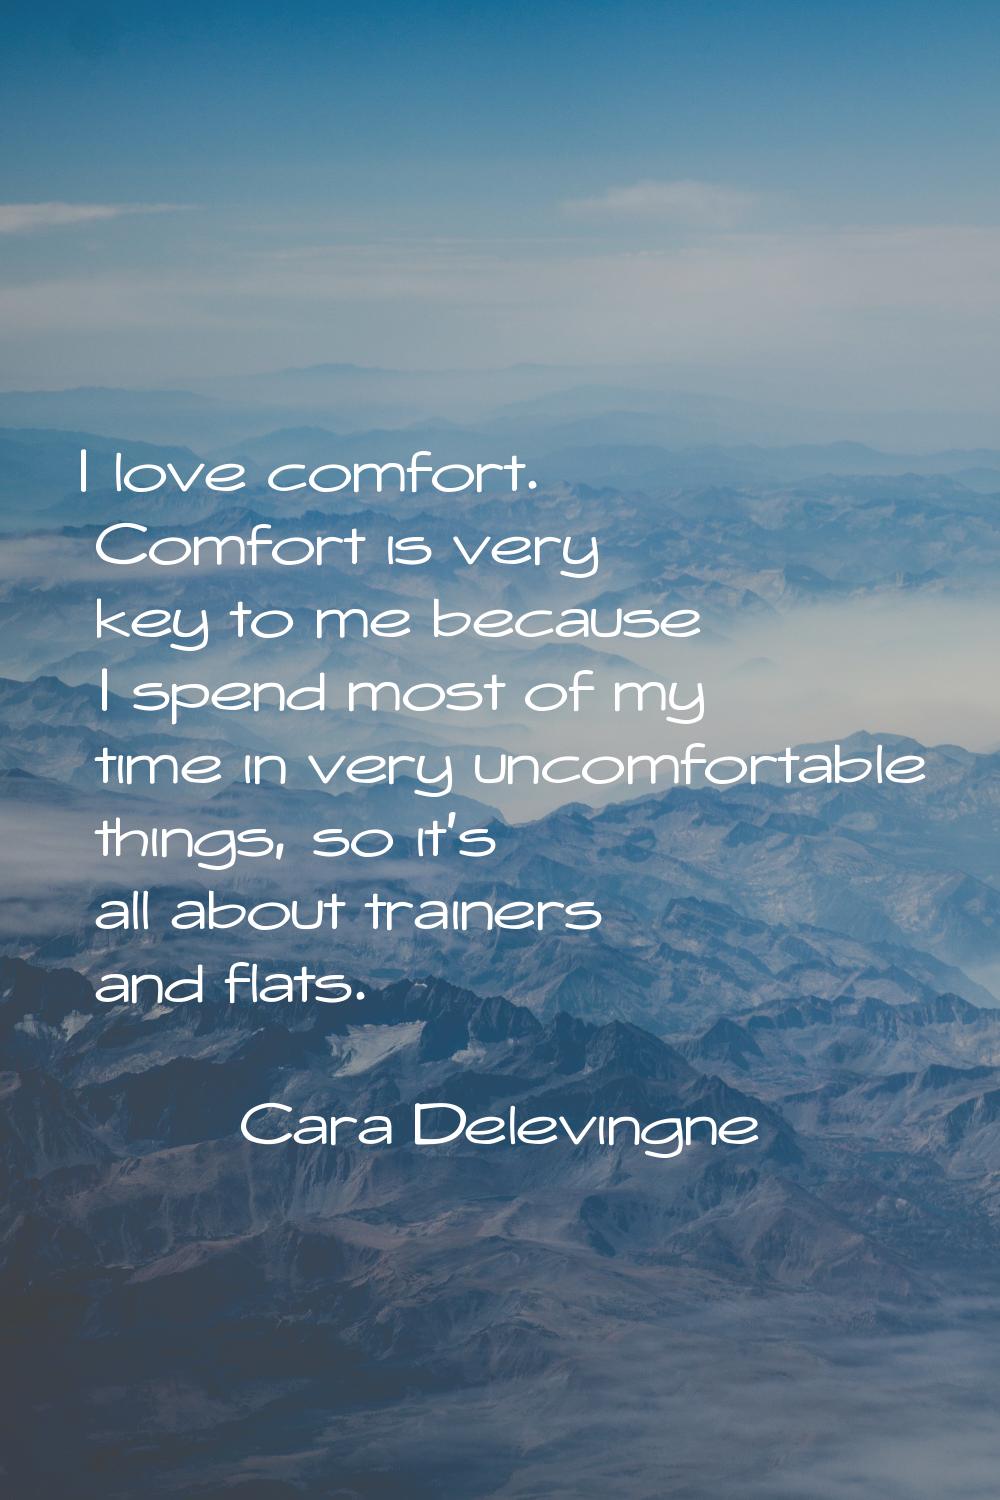 I love comfort. Comfort is very key to me because I spend most of my time in very uncomfortable thi